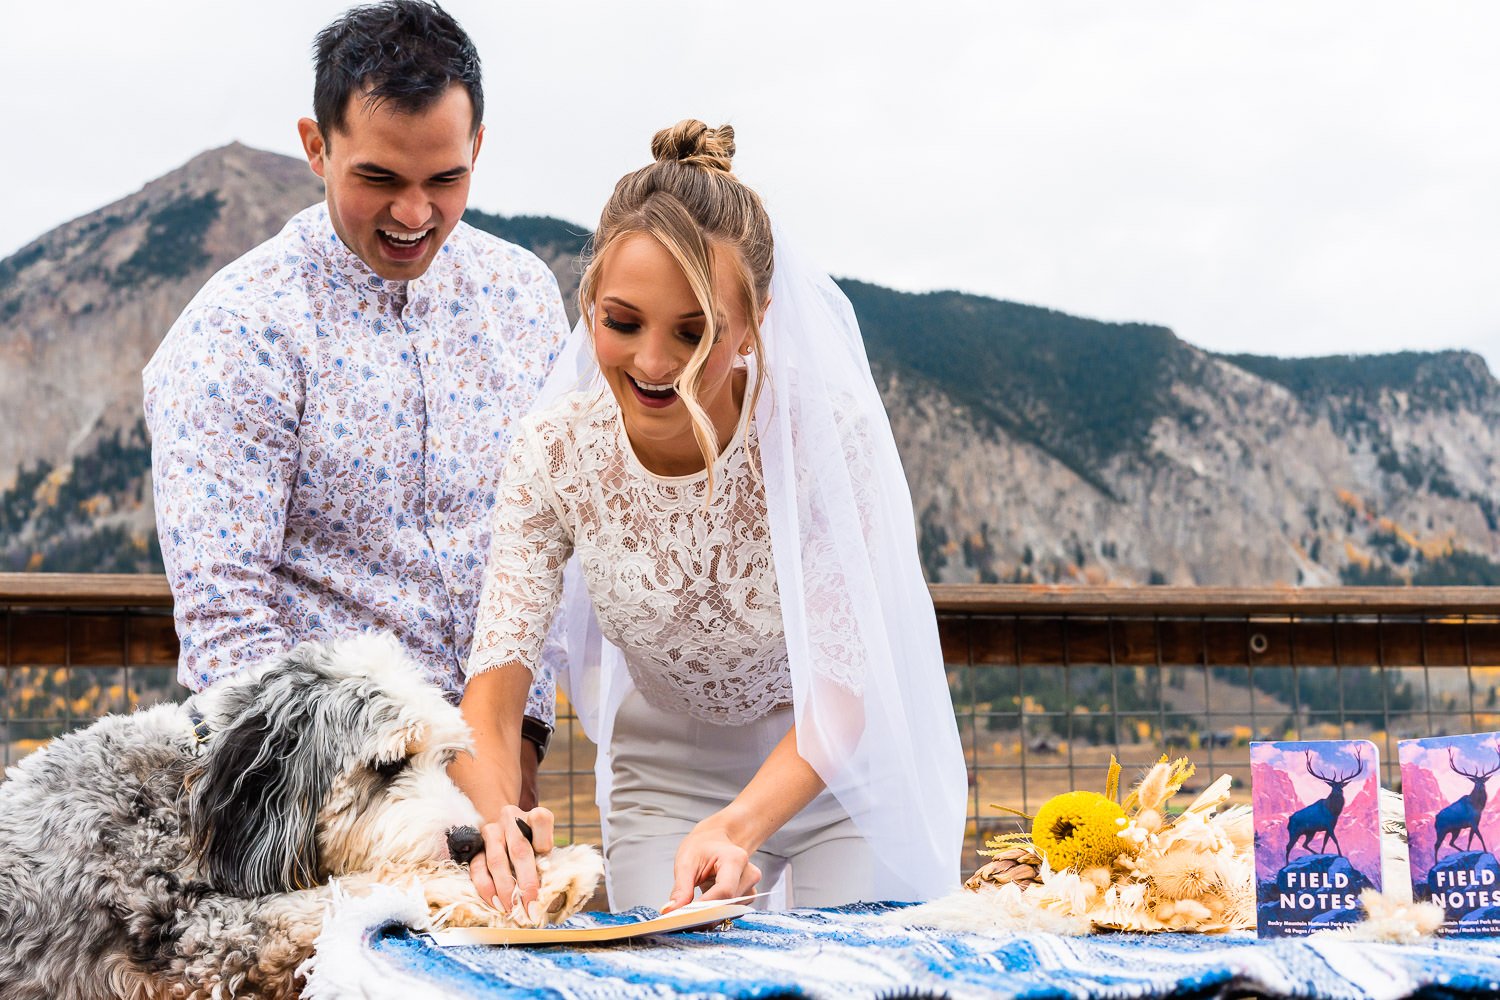 A man and woman capturing elopement photos with their beloved dog.